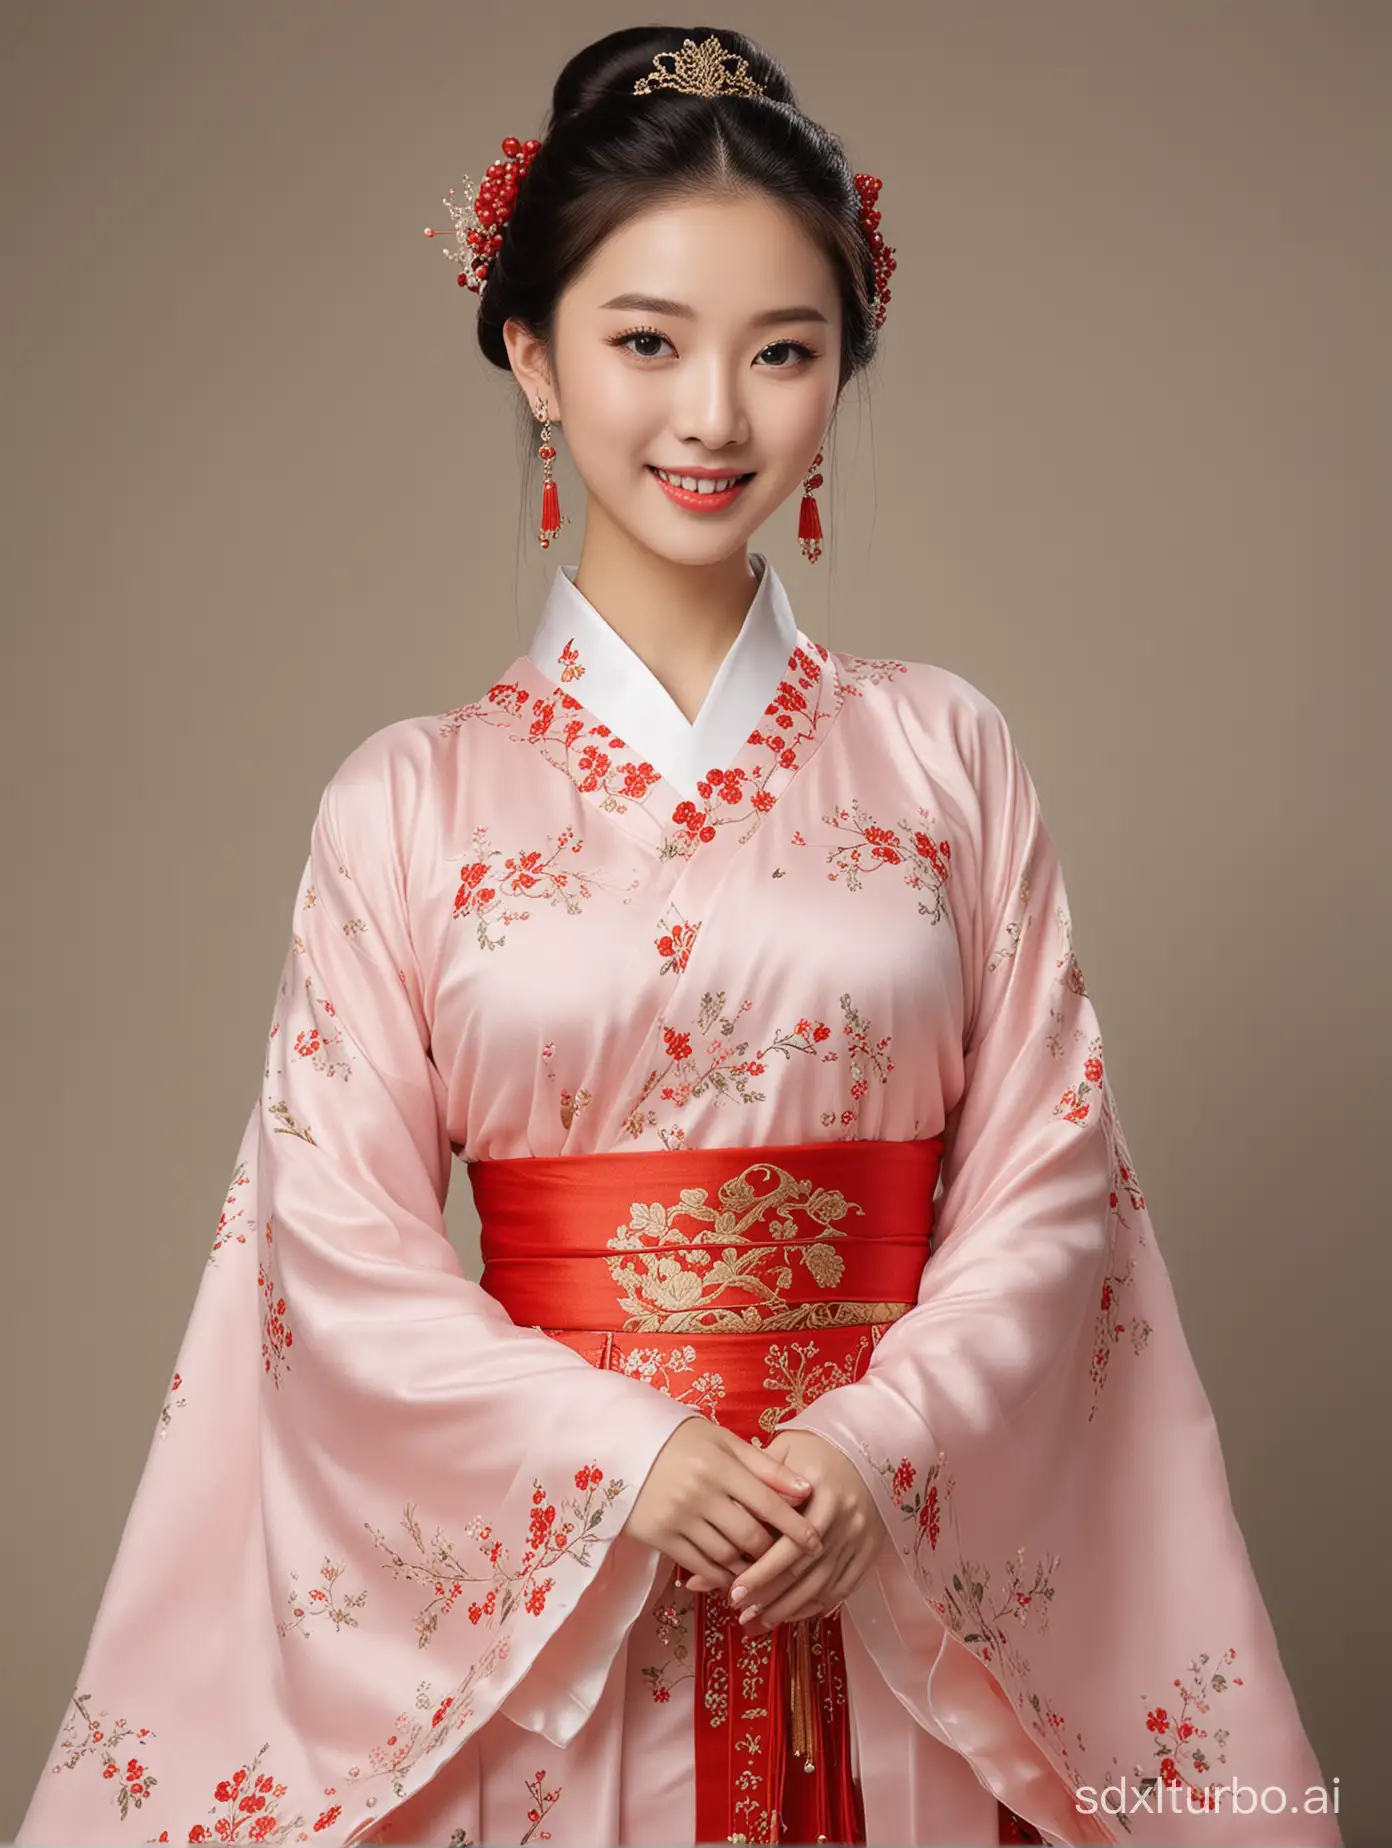 A very beautiful girl from China, 18 years old, princess, crested official gown, Chinese style, Tang Dynasty,full body, faint blush, red lips, exquisite earrings, smile, red Hanfu, facing the camera, full-body lens, full-body photo, the best quality